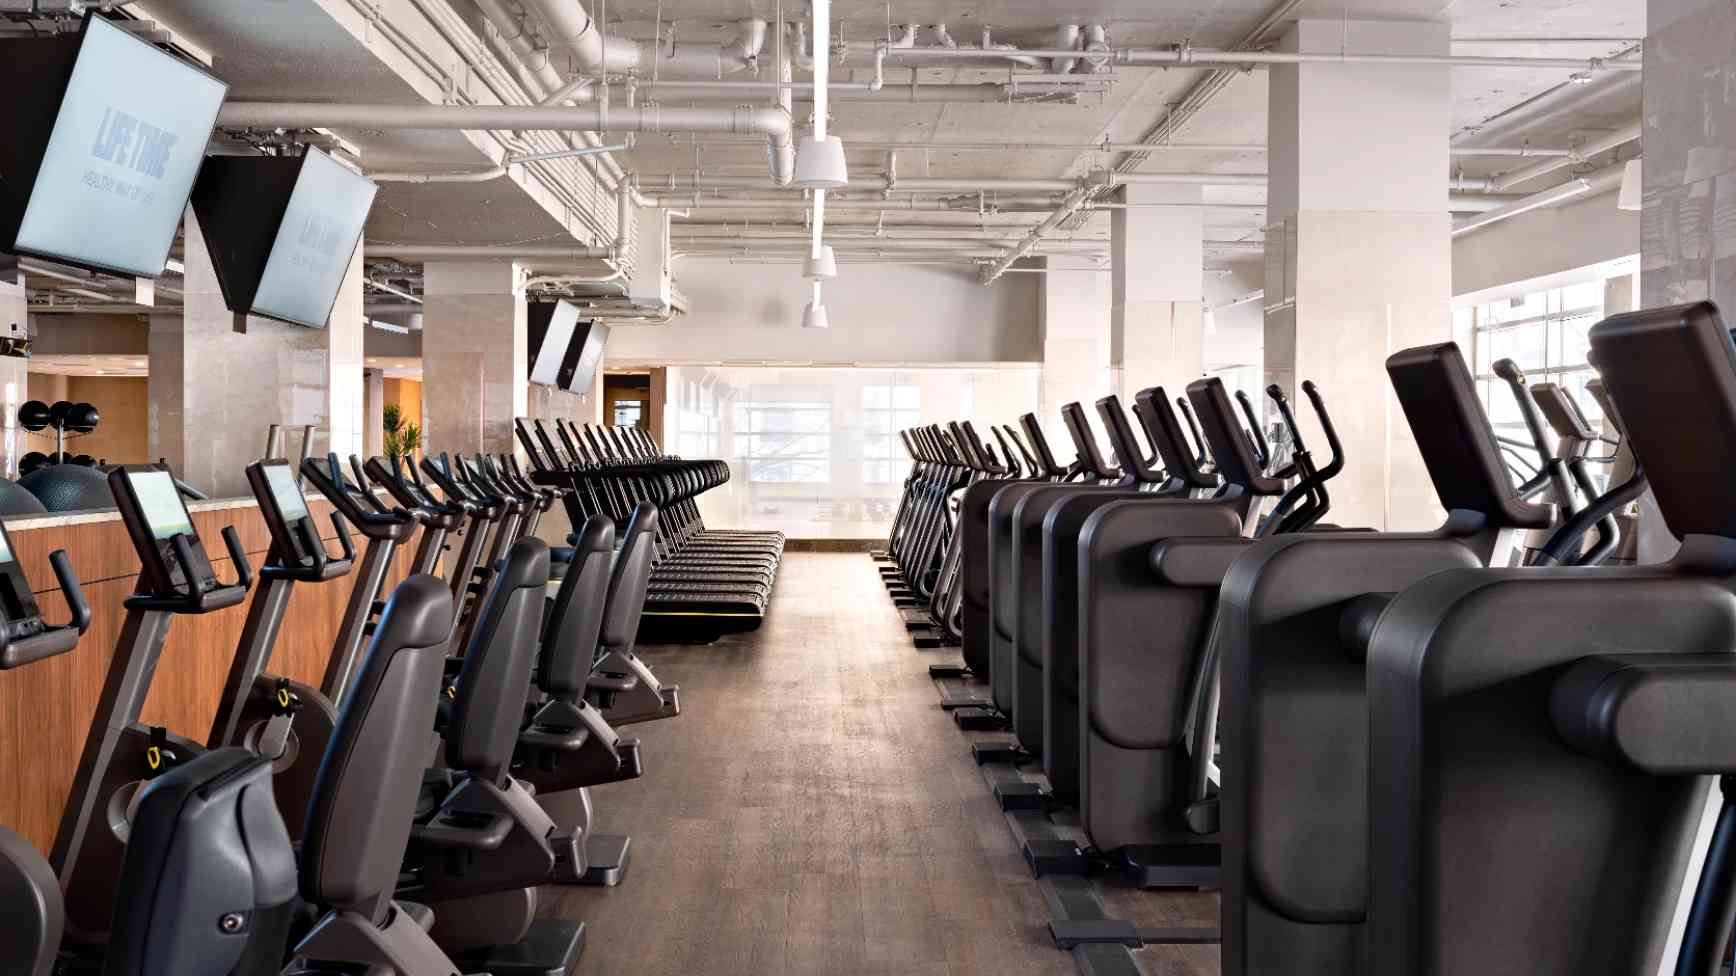 Workout floor space with high ceilings, wood floor, large flat-screen TVs. Long rows of upright bikes, treadmills and ellipticals within natural and artificial lighting.